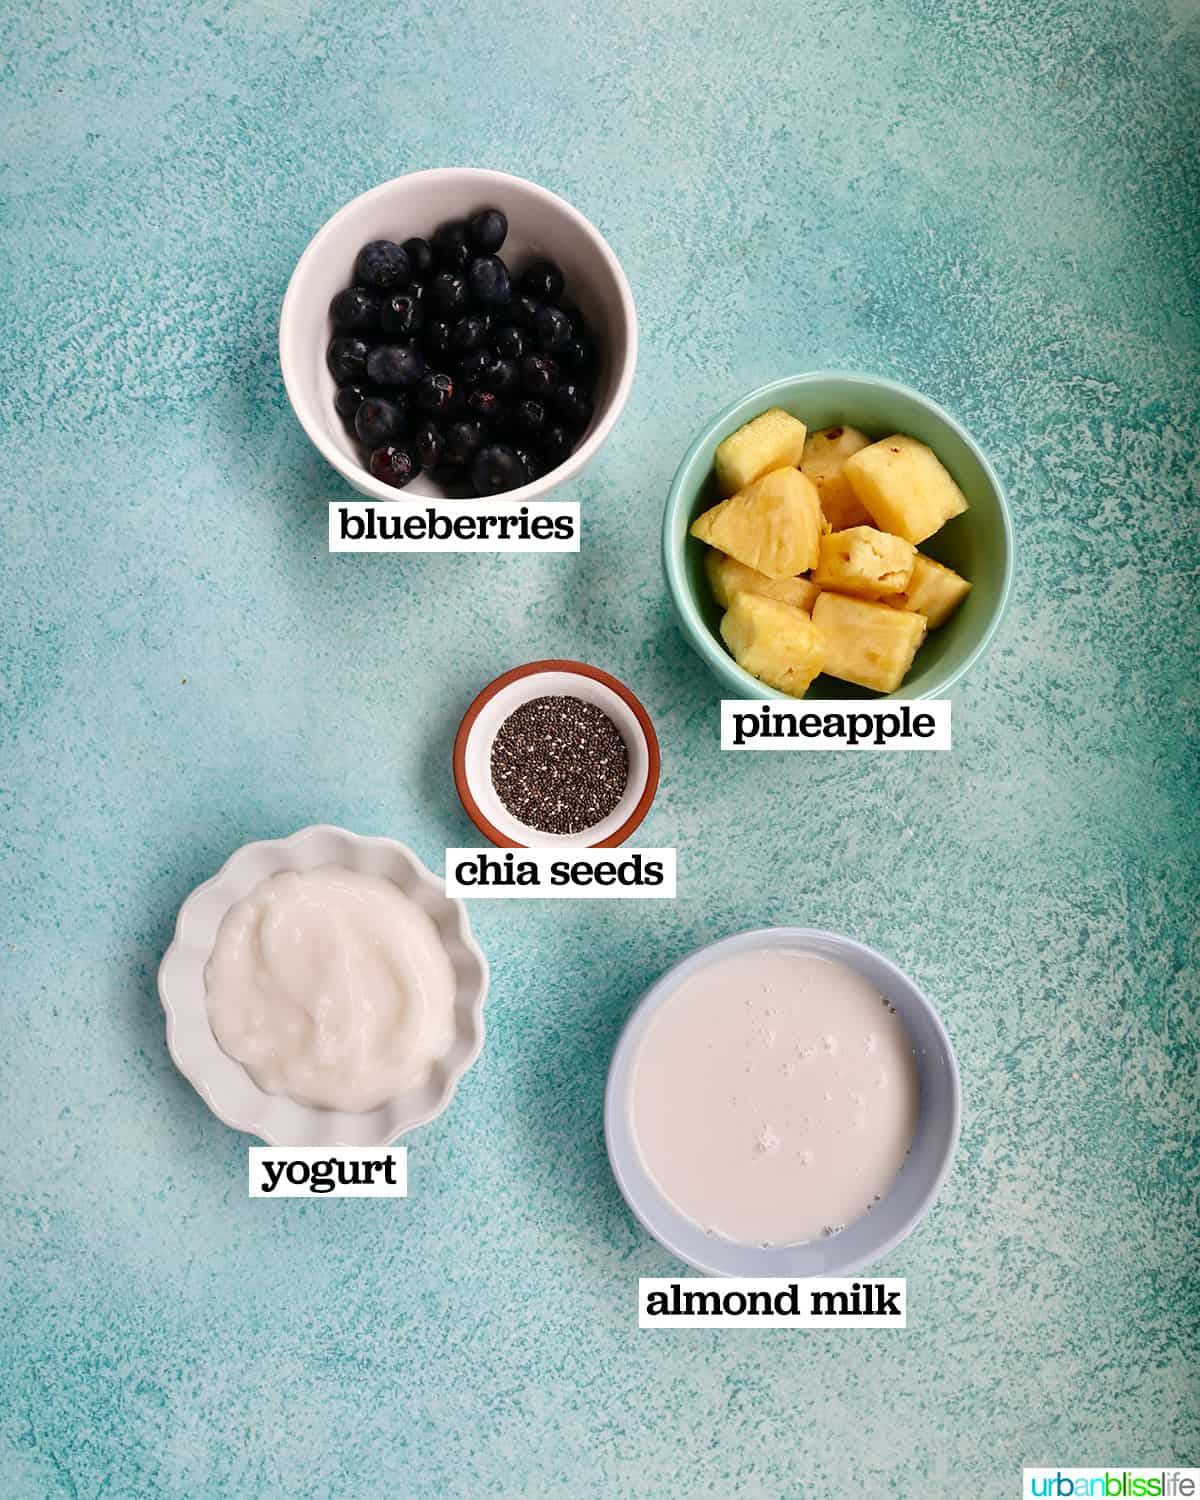 bowls of ingredients to make Blueberry Pineapple Smoothies on a bright blue table.